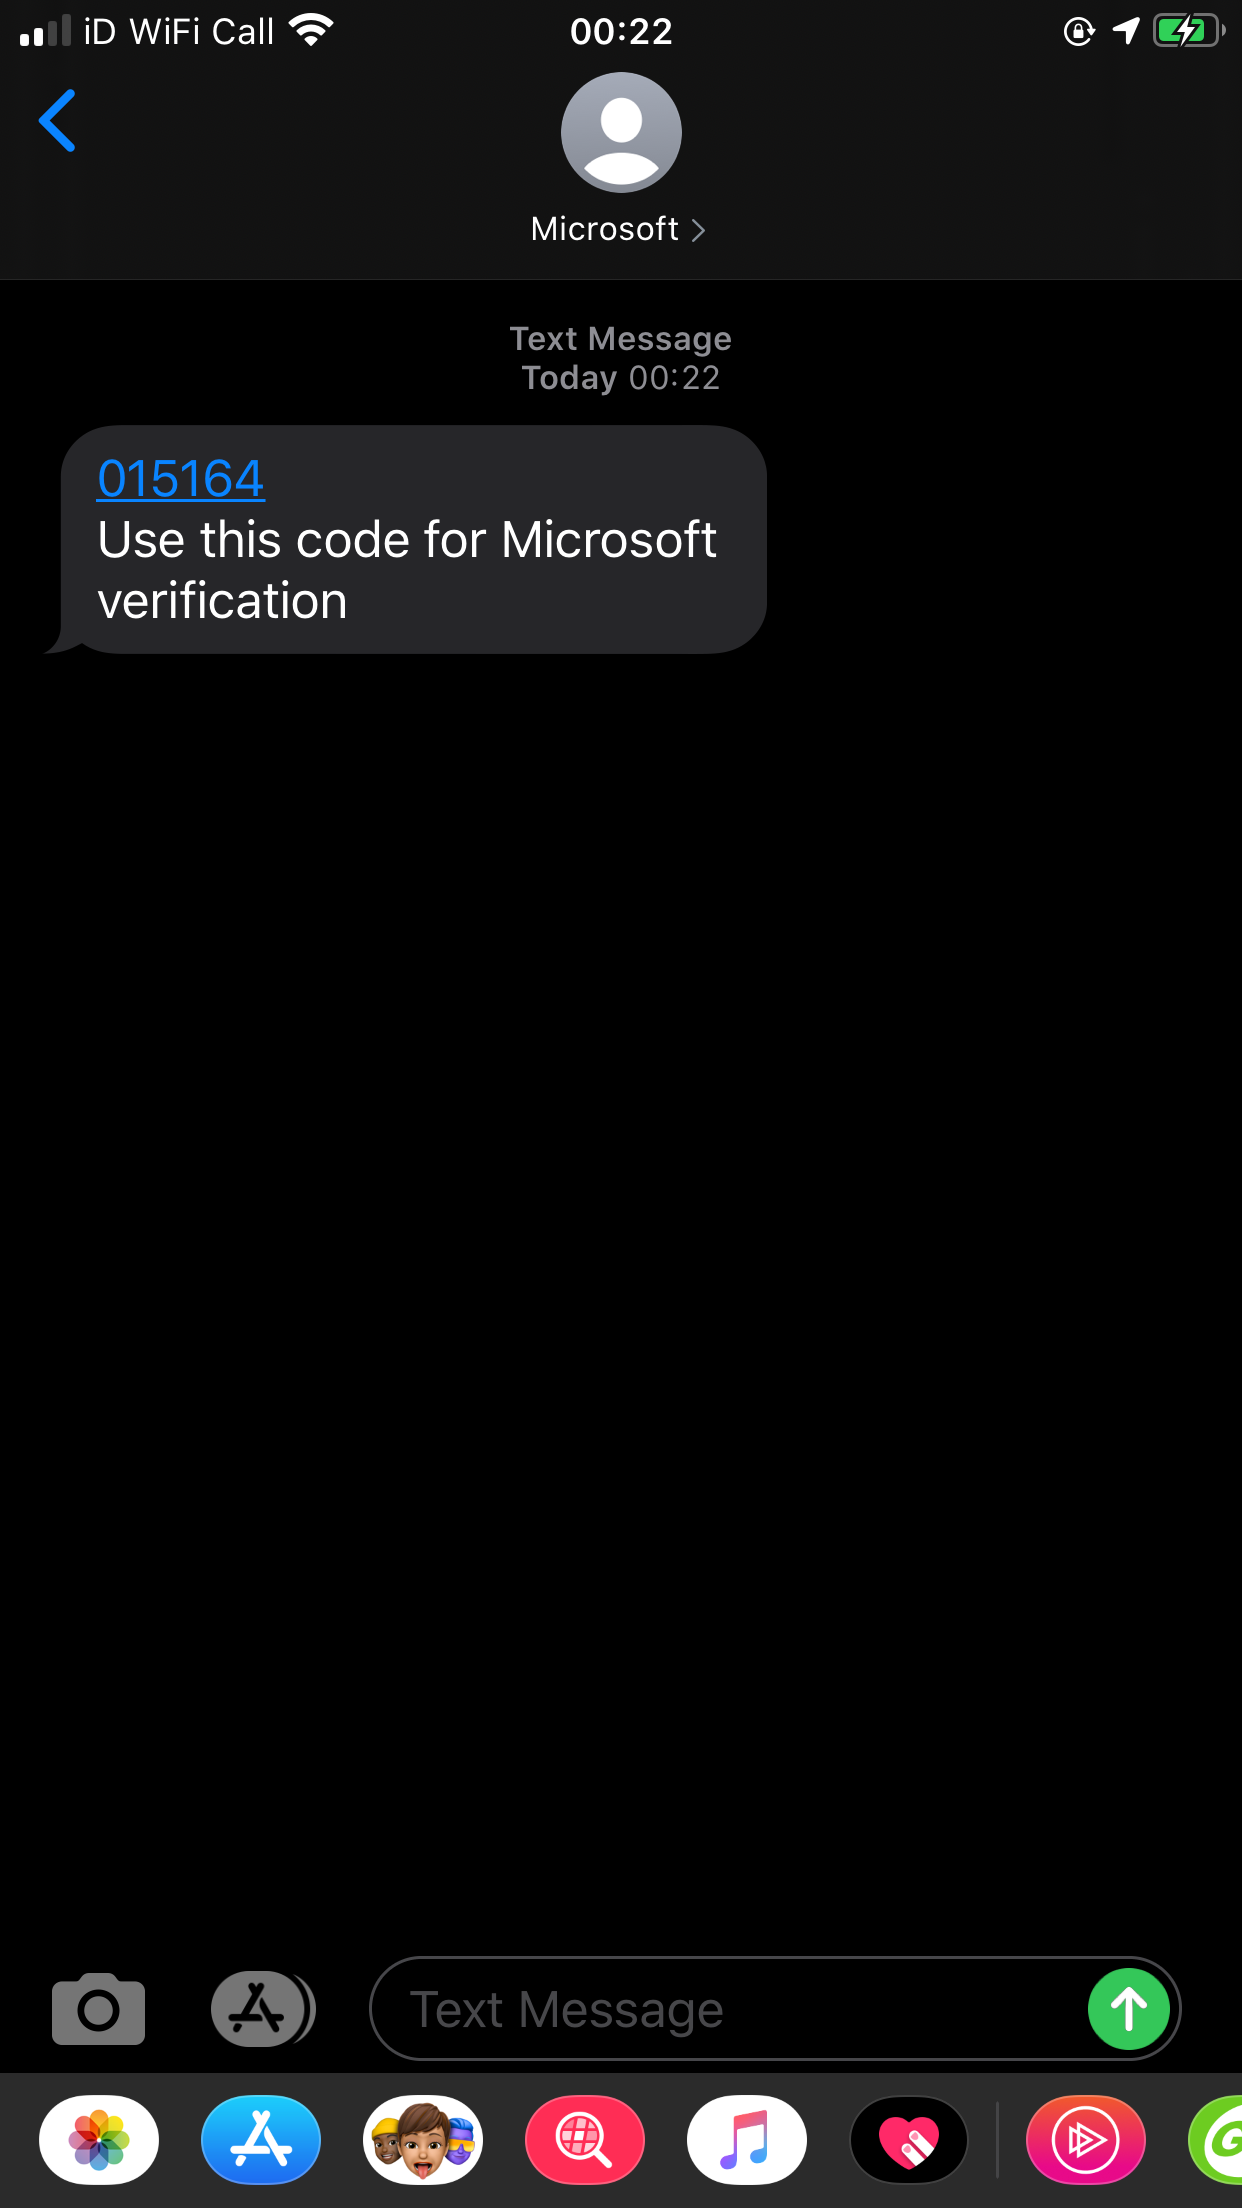 OTP code for azure ad Password-less authentication